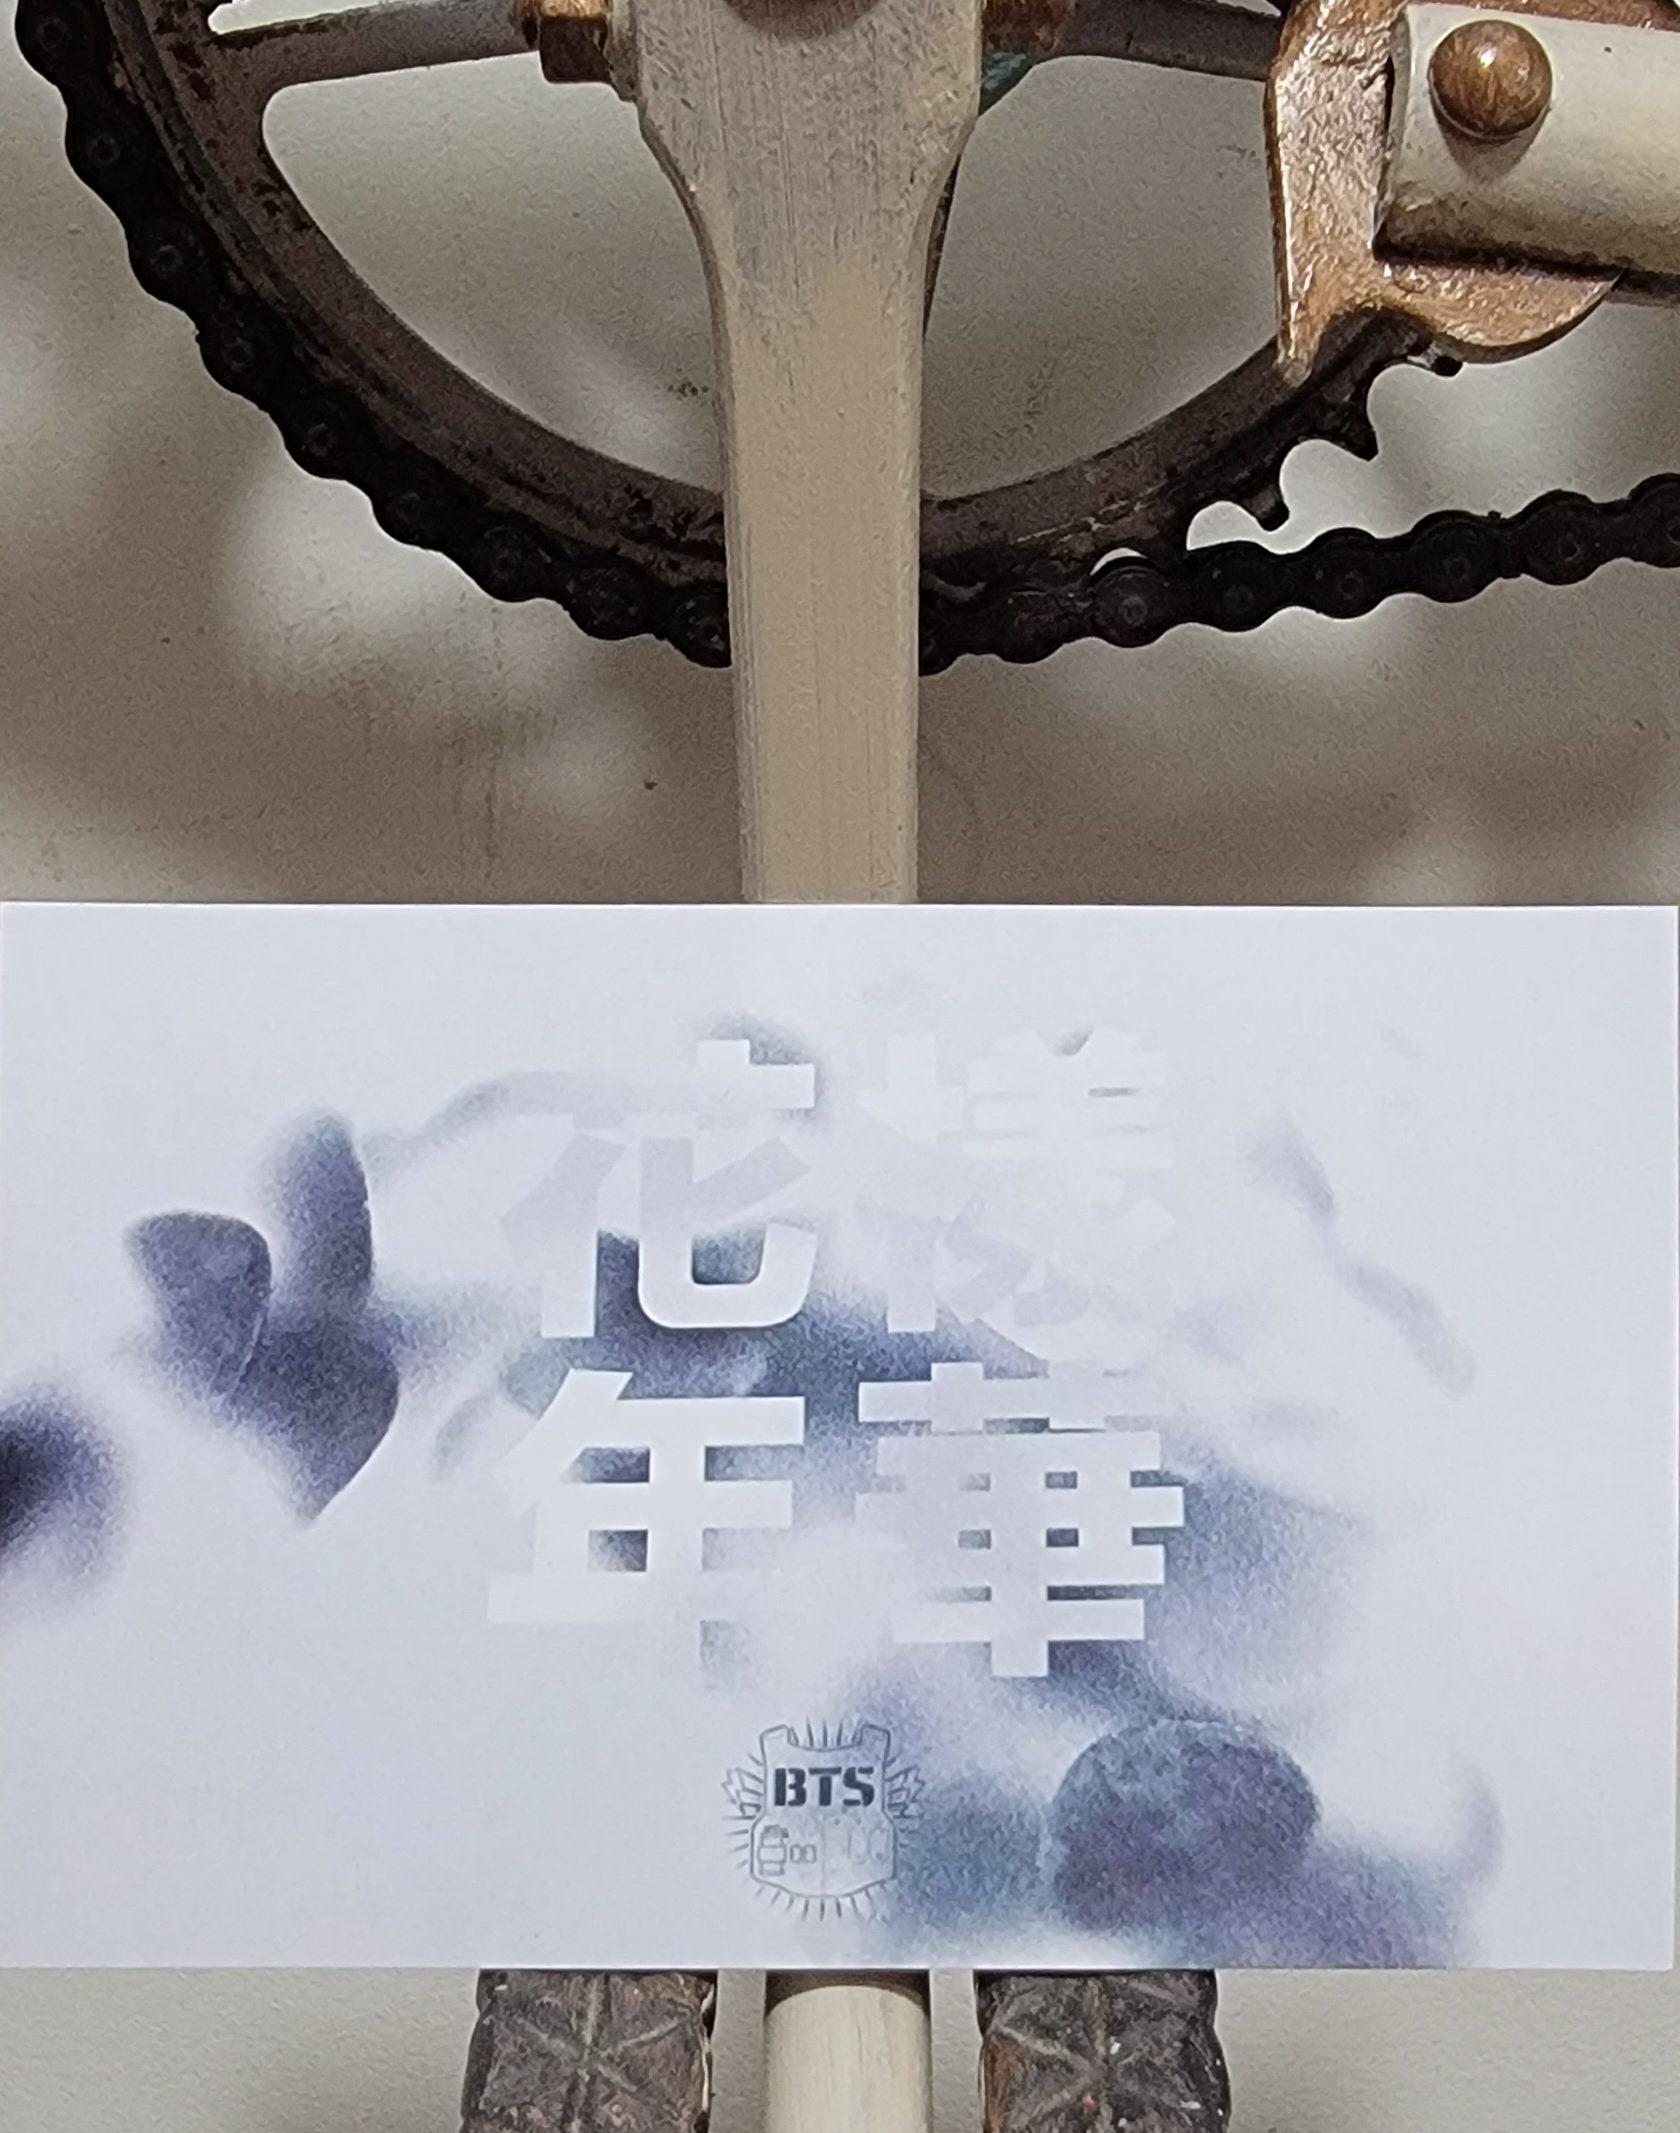 BTS HYYH In the Mood For Love Taiwan Postcards